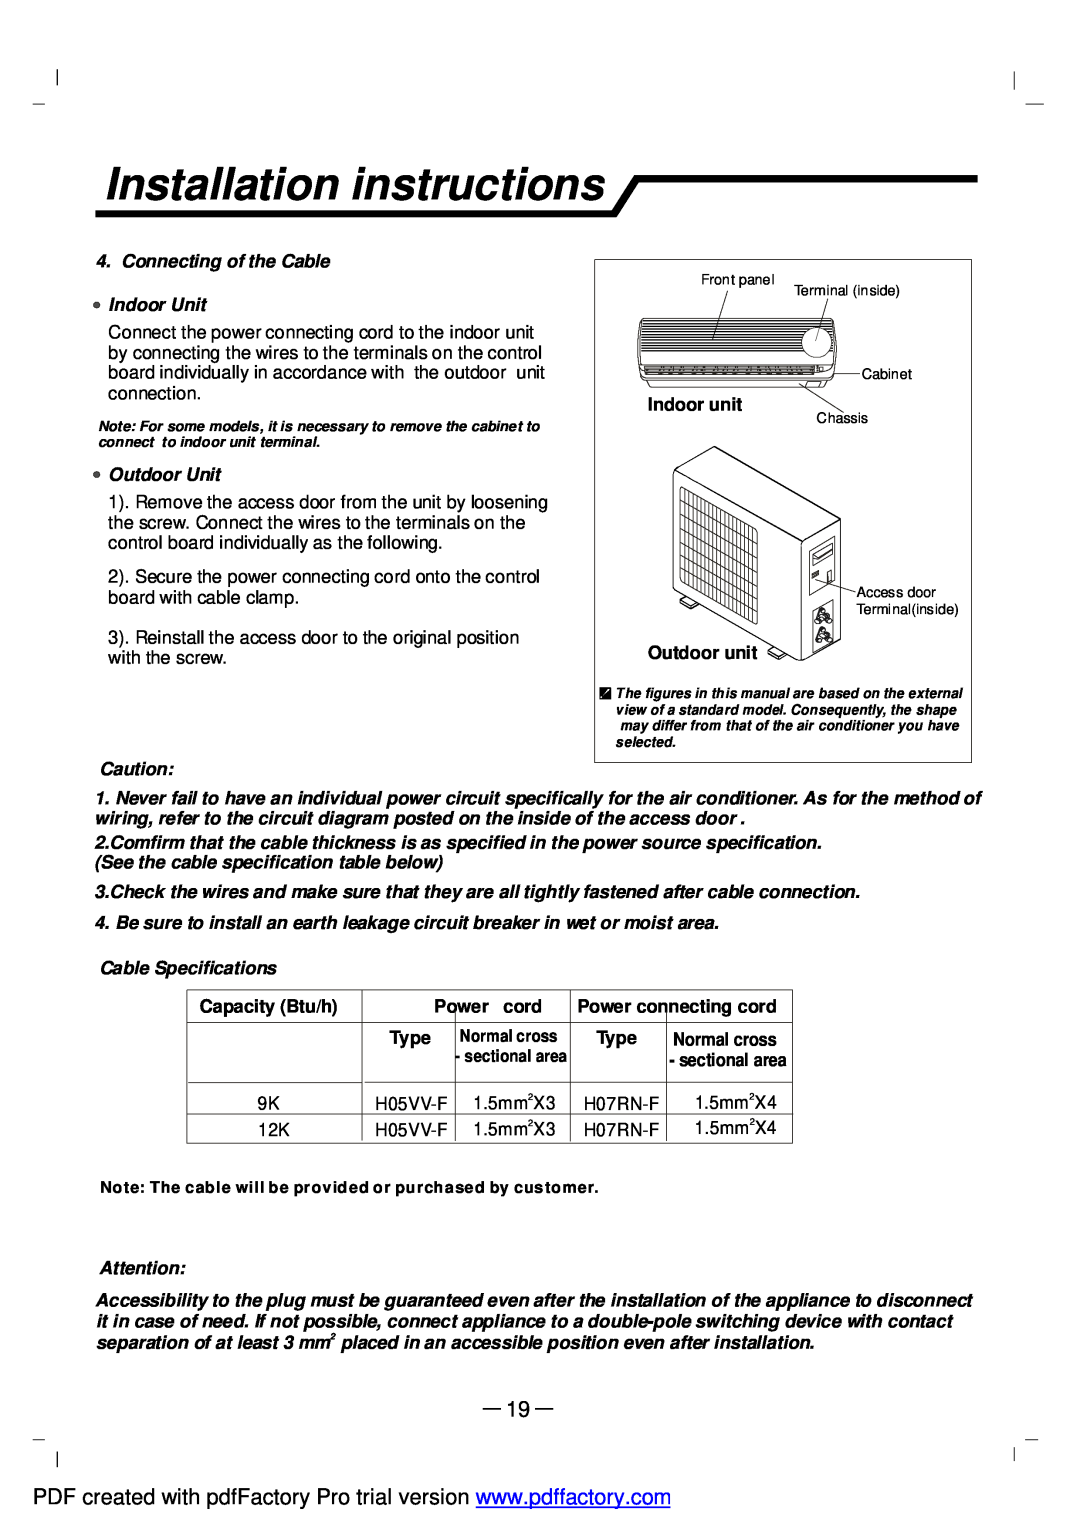 NEC RIH-2667 Installation instructions, Connecting of the Cable Indoor Unit, Outdoor Unit, Indoor unit Outdoor unit, Type 